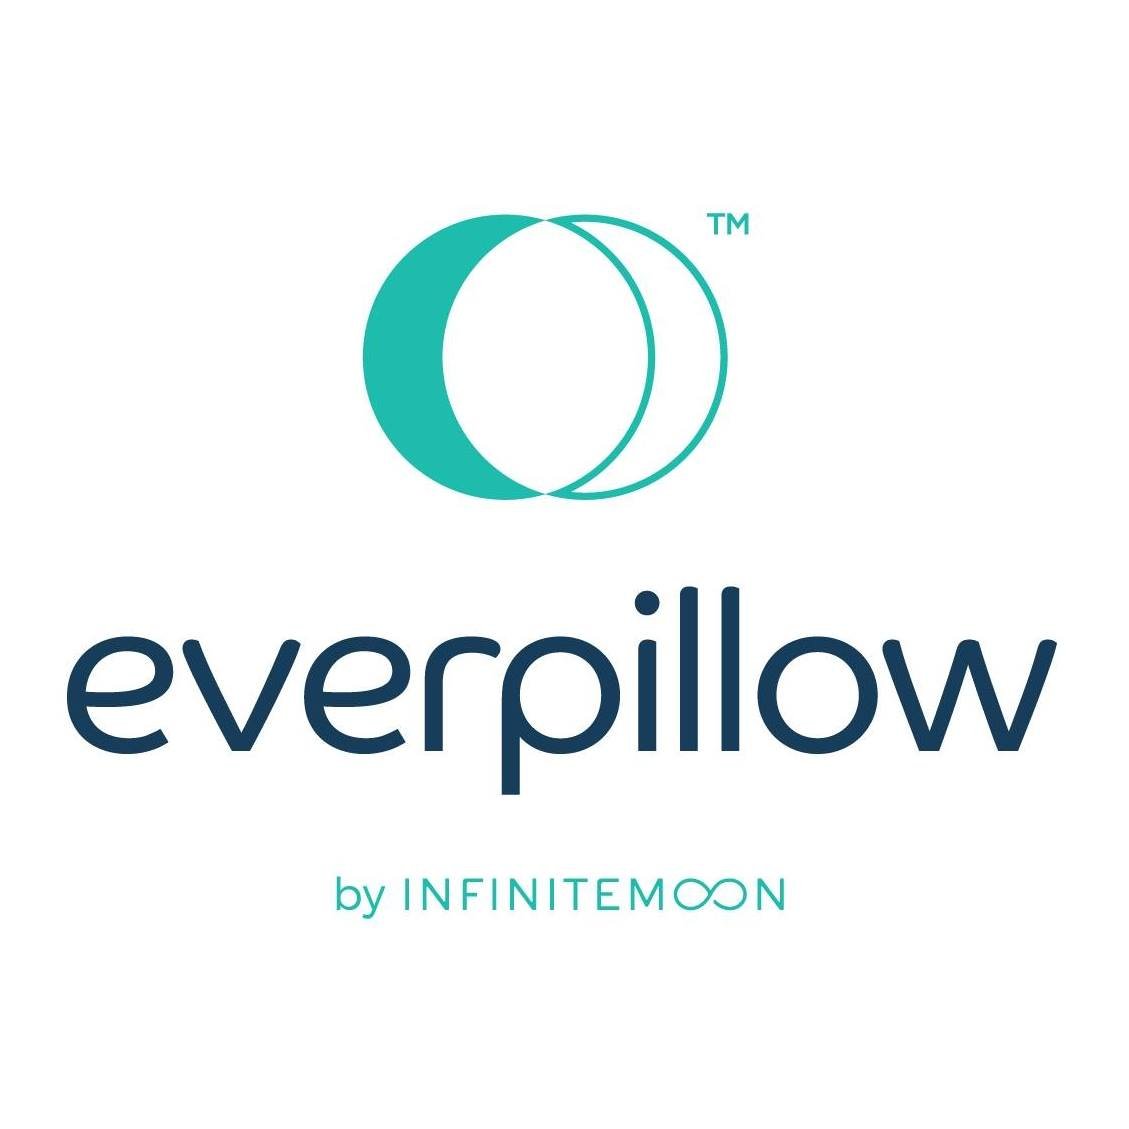 All Natural, Fully Customizable Pillows - Doesn't matter what body type or sleep style you have.